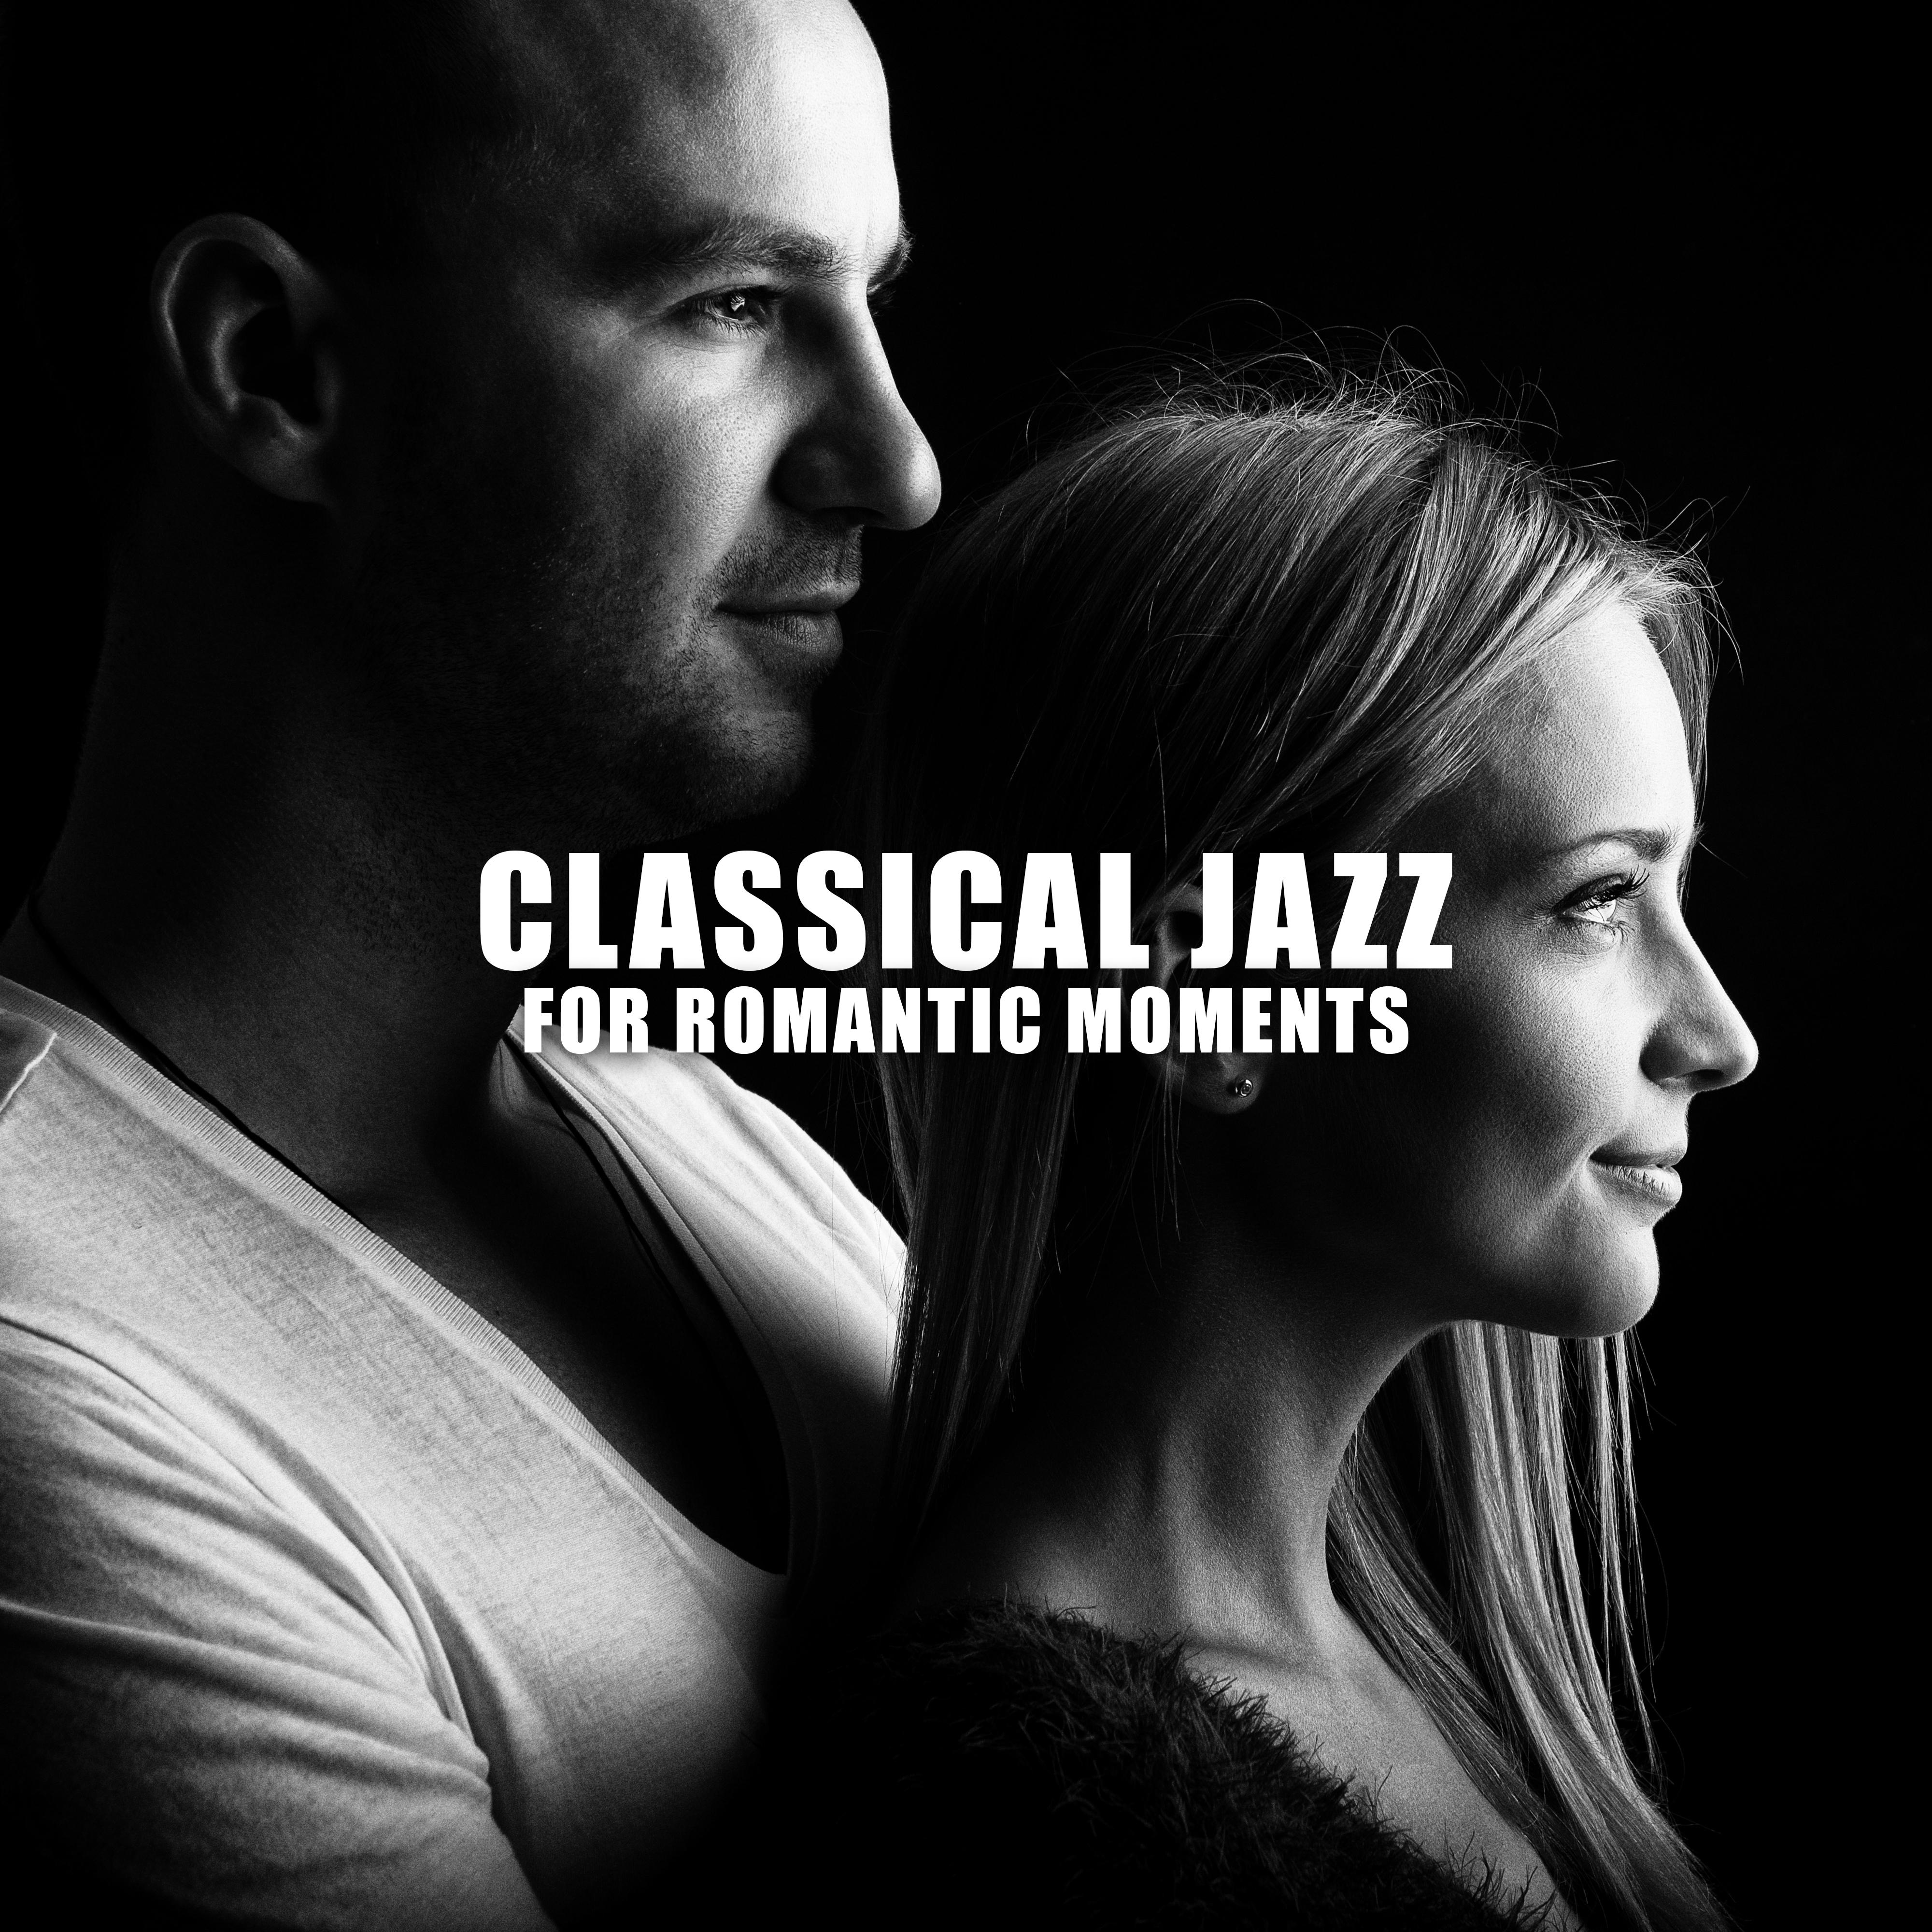 Classical Jazz for Romantic Moments – Instrumental Music for Lovers, Intimate Moments, Romantic Vibes, Jazz Lounge, Sensual Music at Night